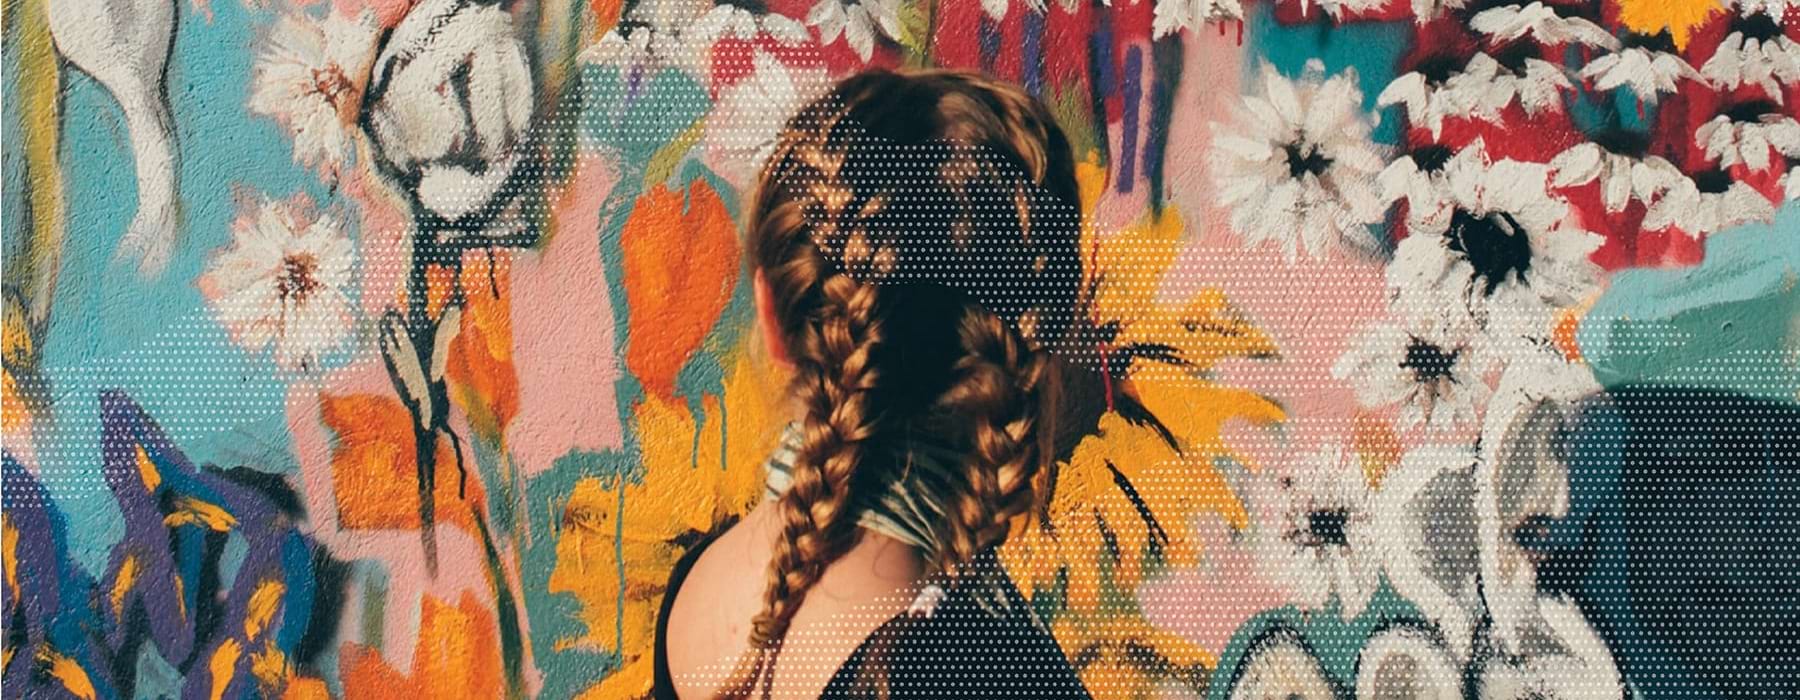 woman with two braids looks at an outdoor wall mural of colorful flowers